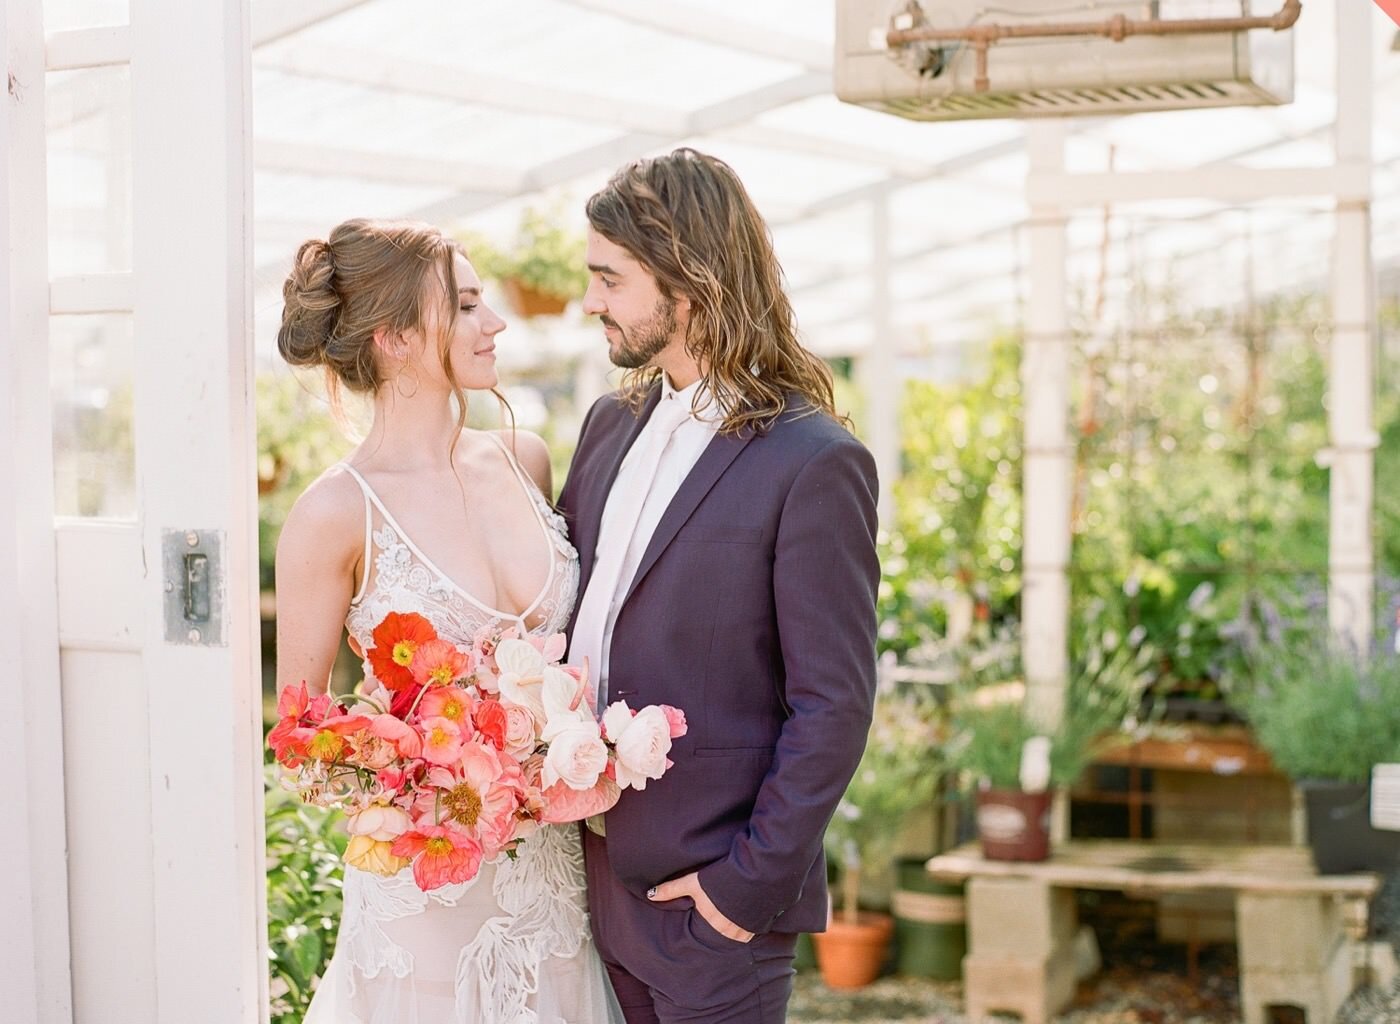 Couple with colorful, tropical-inspired bouquet